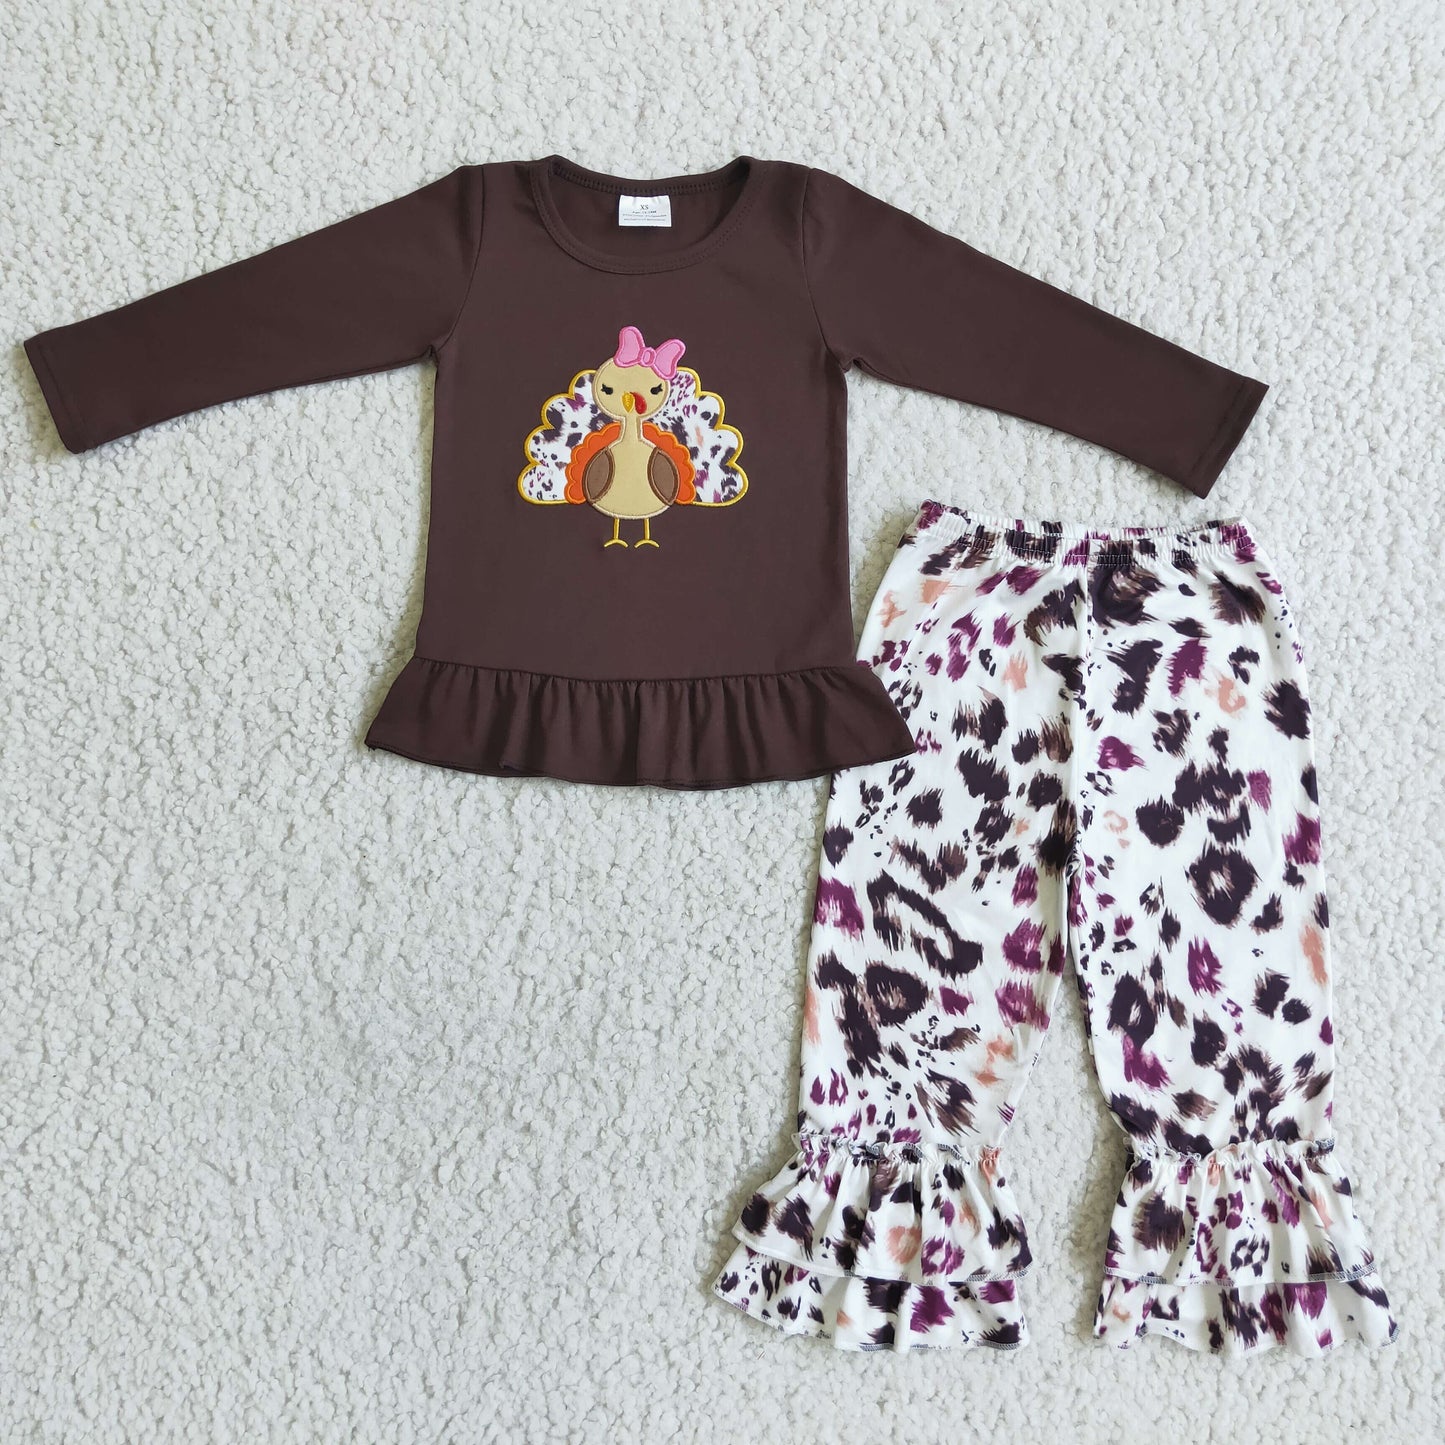 GLP0059 girl thanksgiving day brown long sleeve top with turkey embroidery match colorful leopard bell bottoms